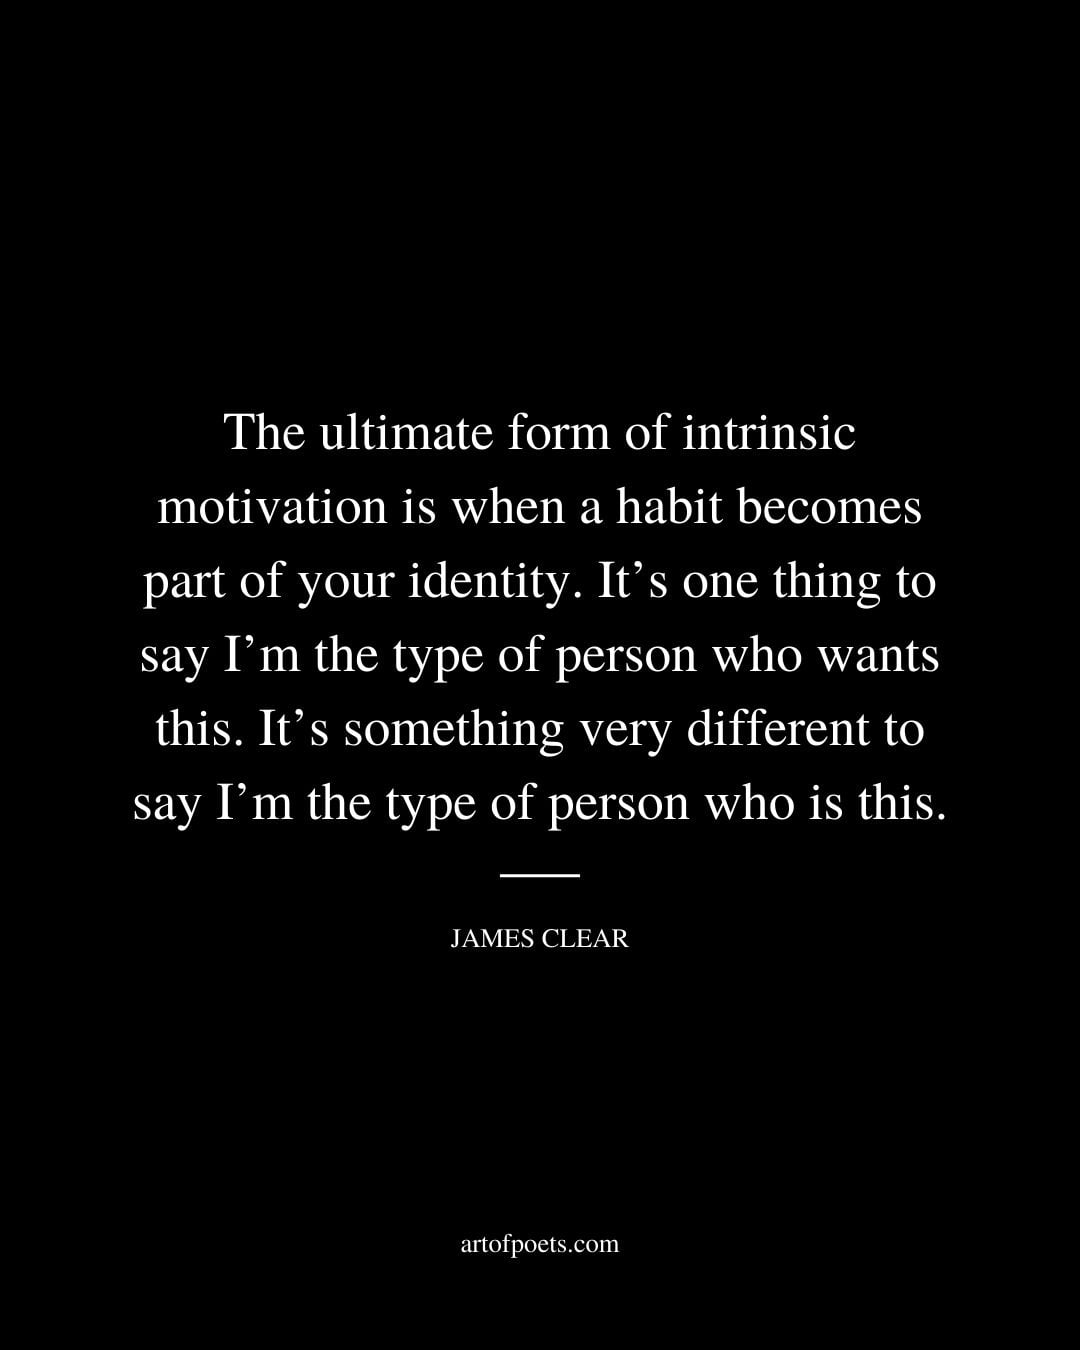 The ultimate form of intrinsic motivation is when a habit becomes part of your identity